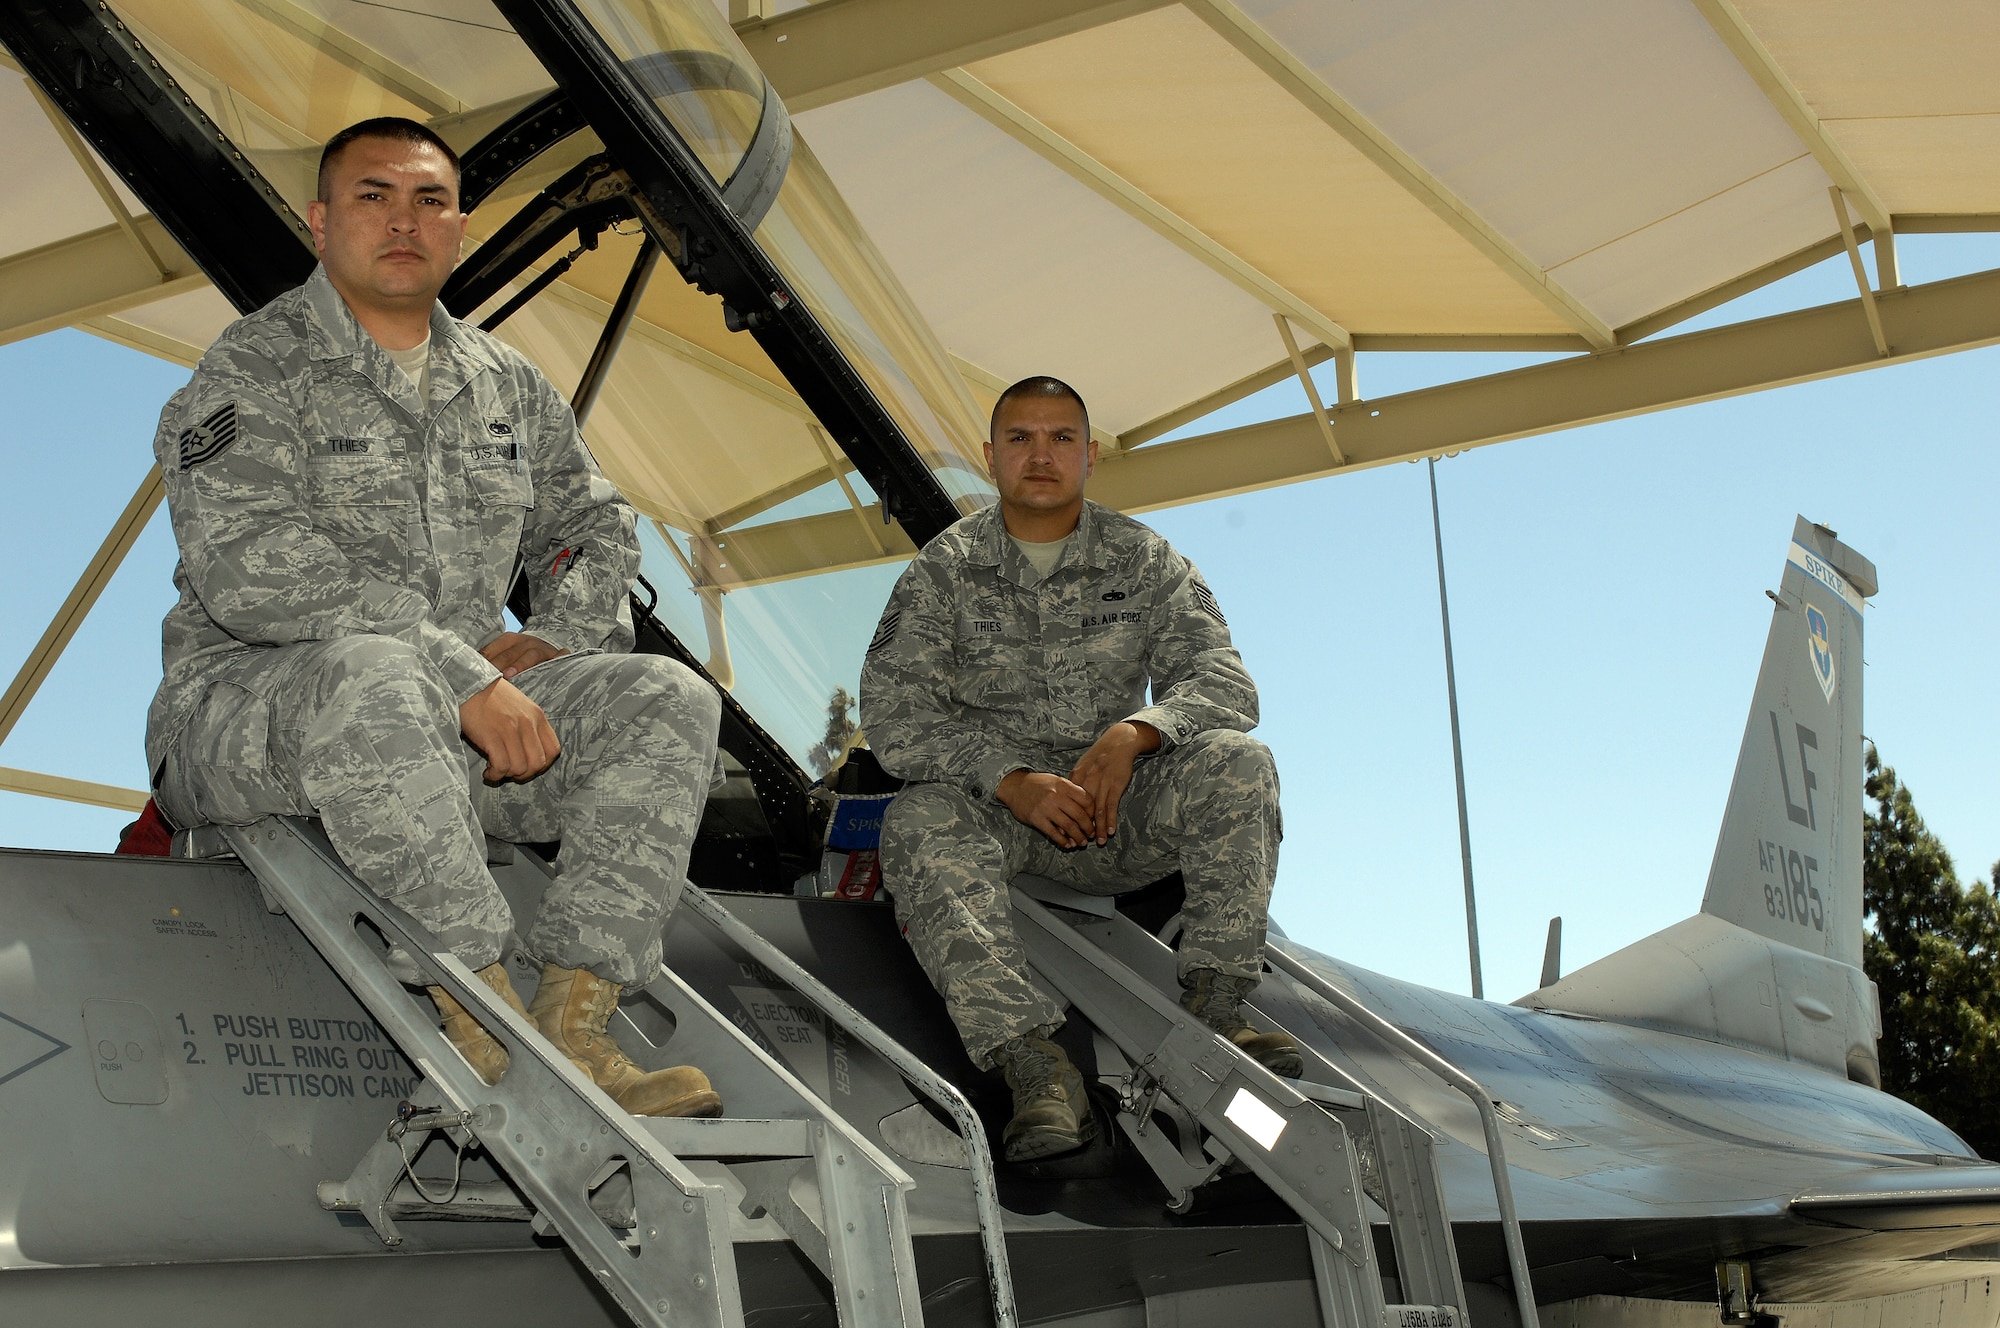 Tech. Sgts. Poun and David Thies, brothers and 56th Maintenance Group crew chiefs, pose for a photo April 5 at Luke. The brothers have served on active duty for 14 and 11 years, respectively. (U.S. Air Force photo by Staff Sgt. Jason Colbert)